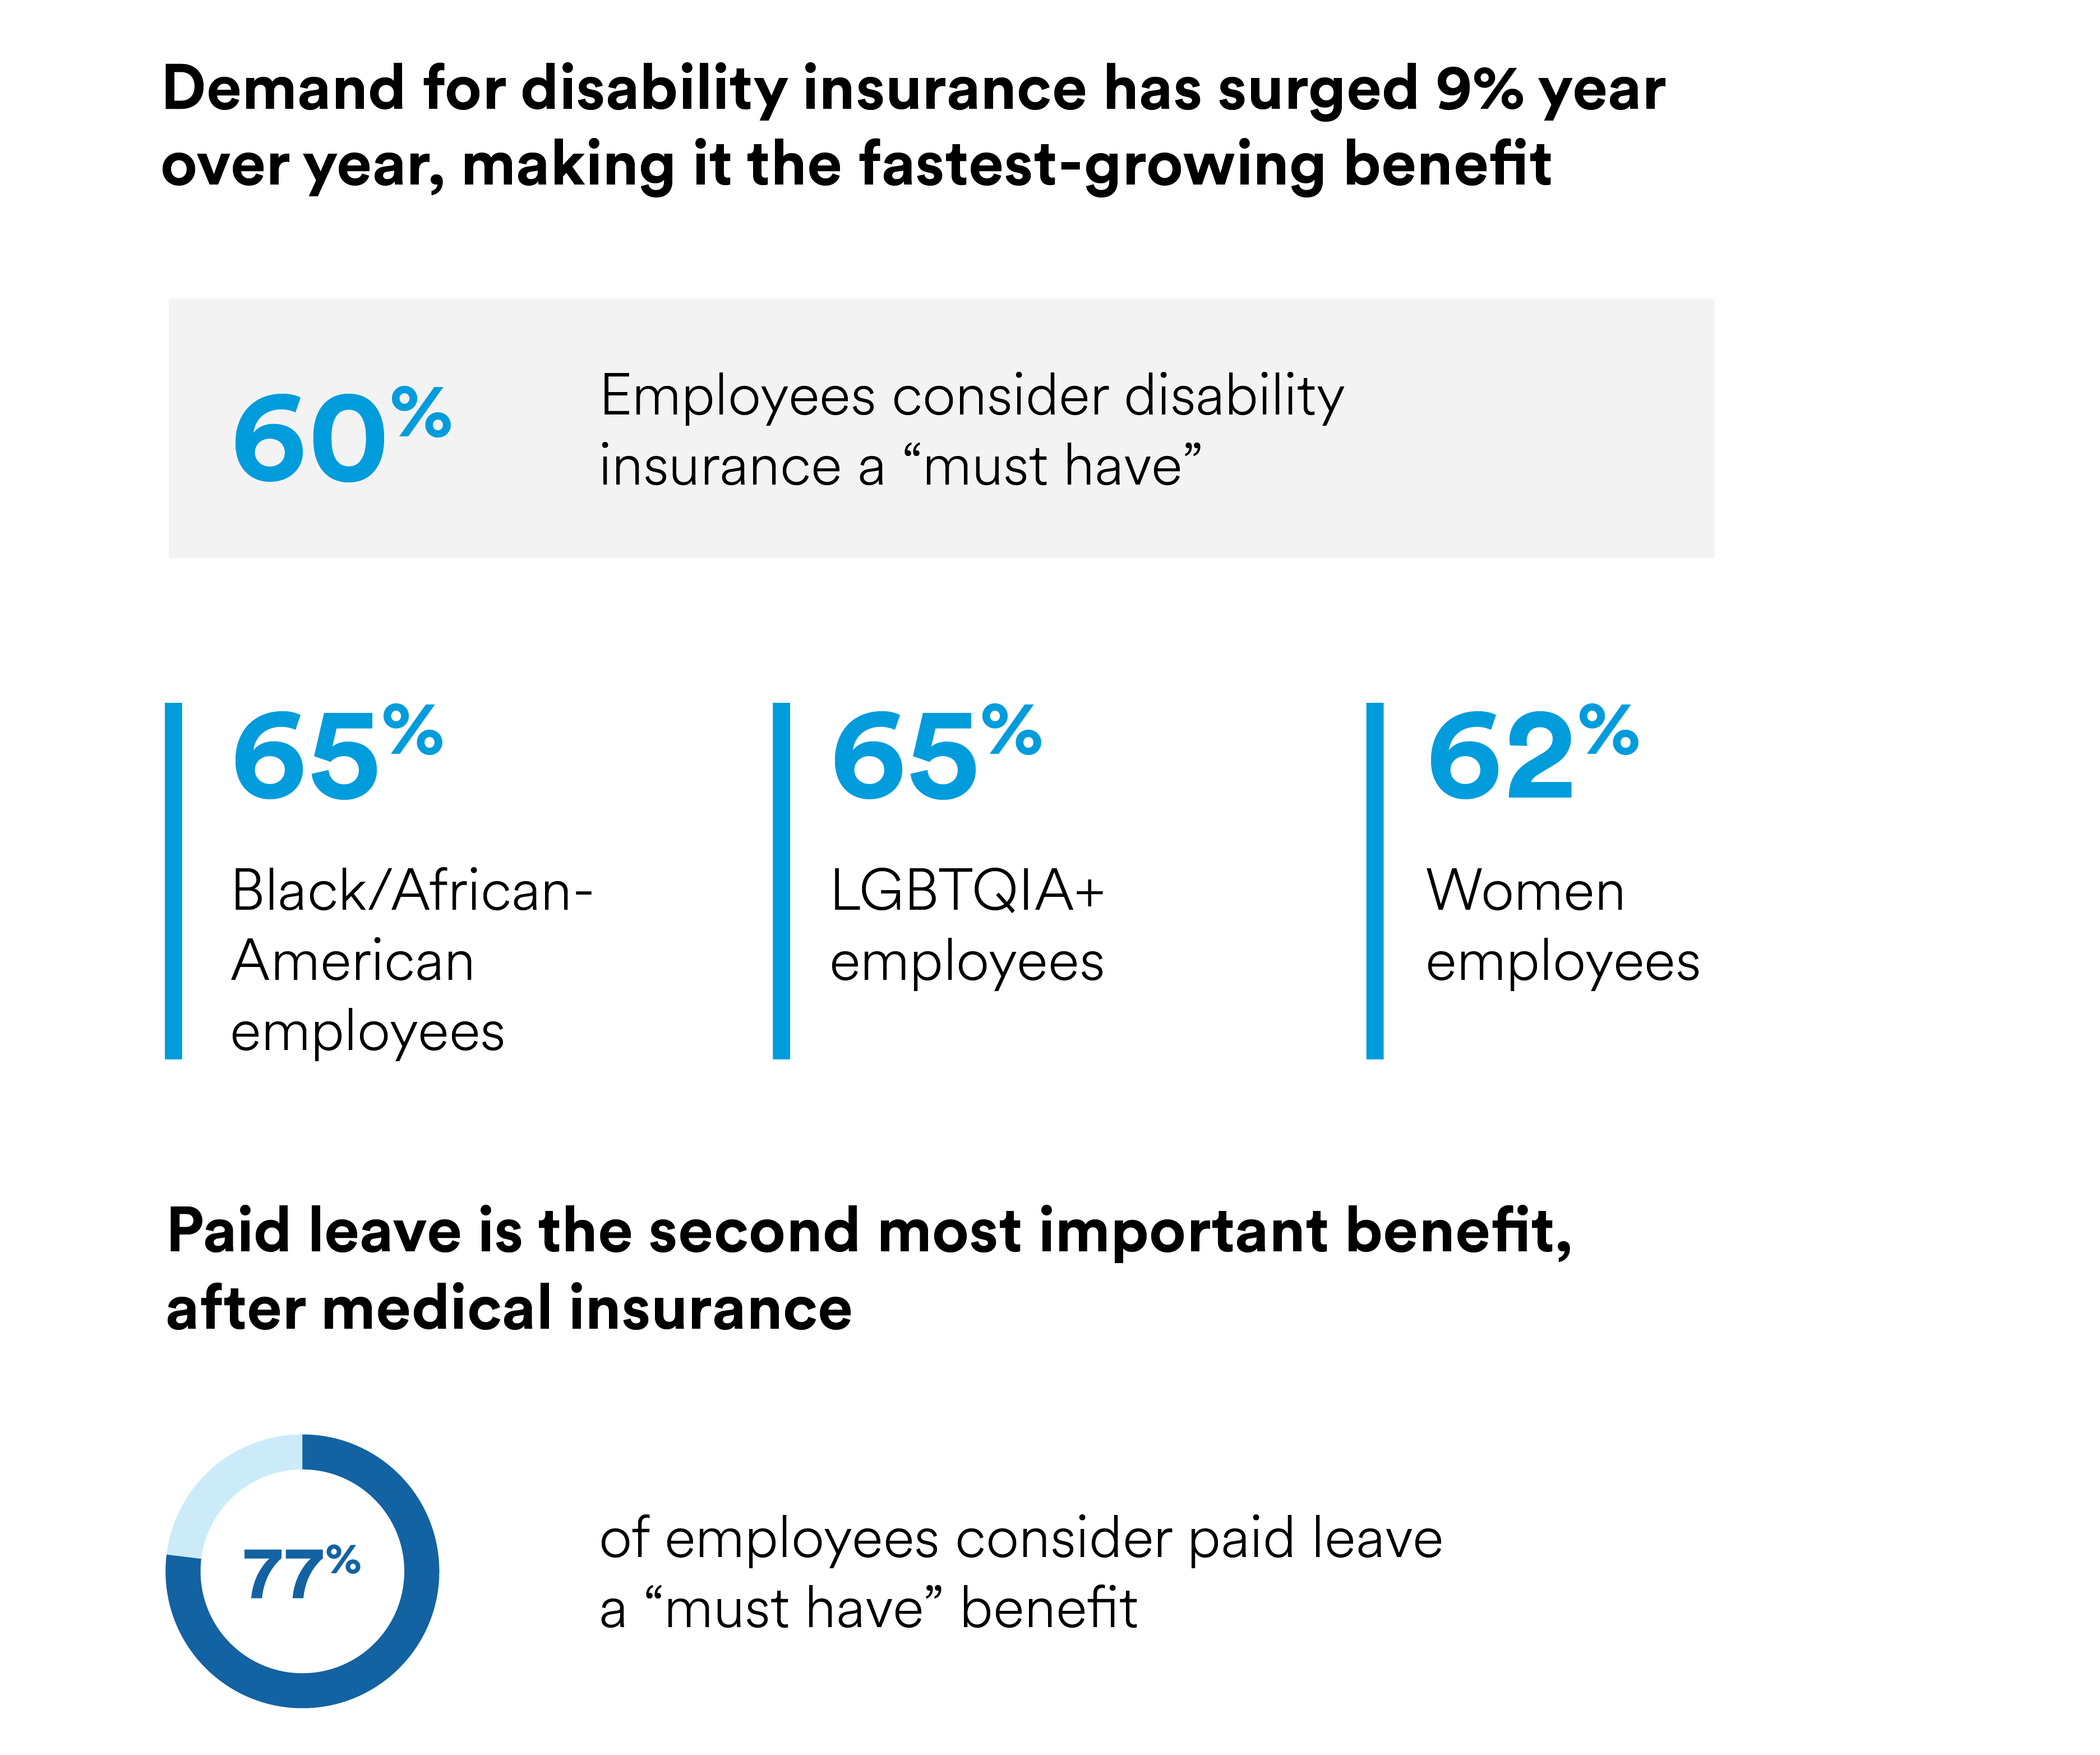 Disability and leave for employee care